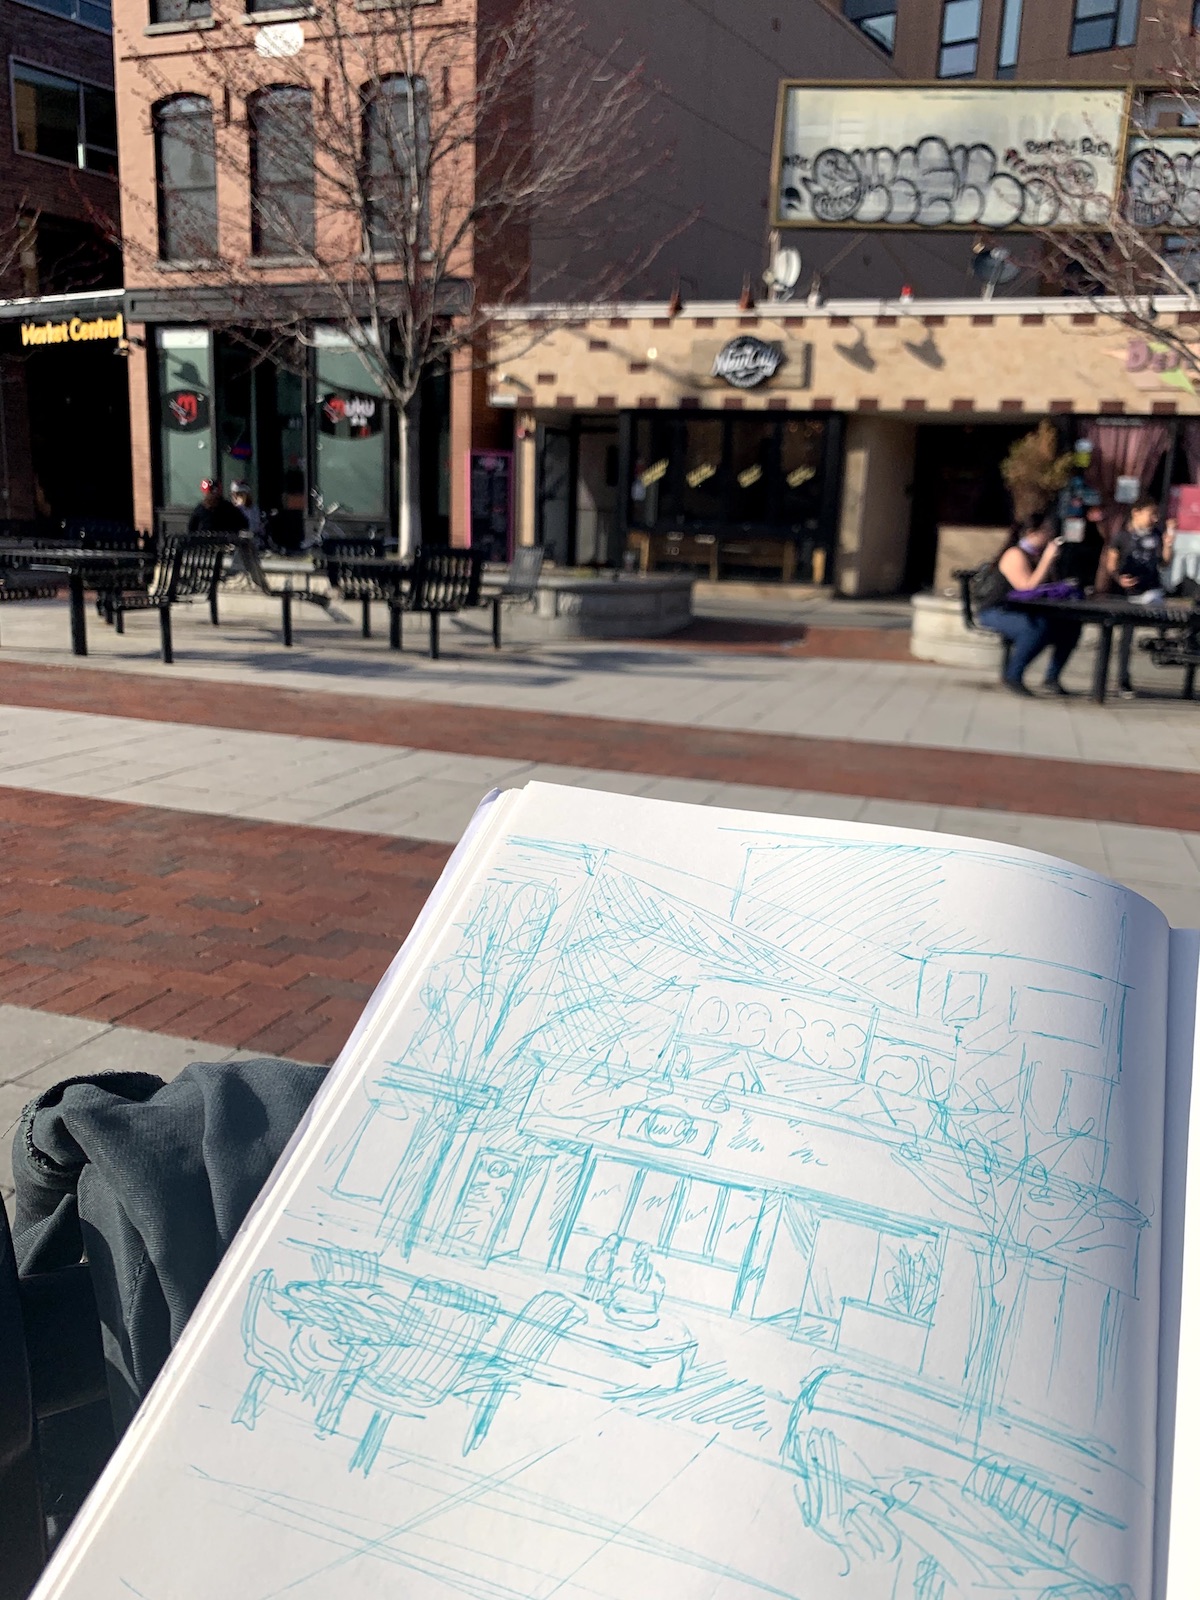 A pen sketch of Lafayette Square and the ice cream place I've become too familiar with.